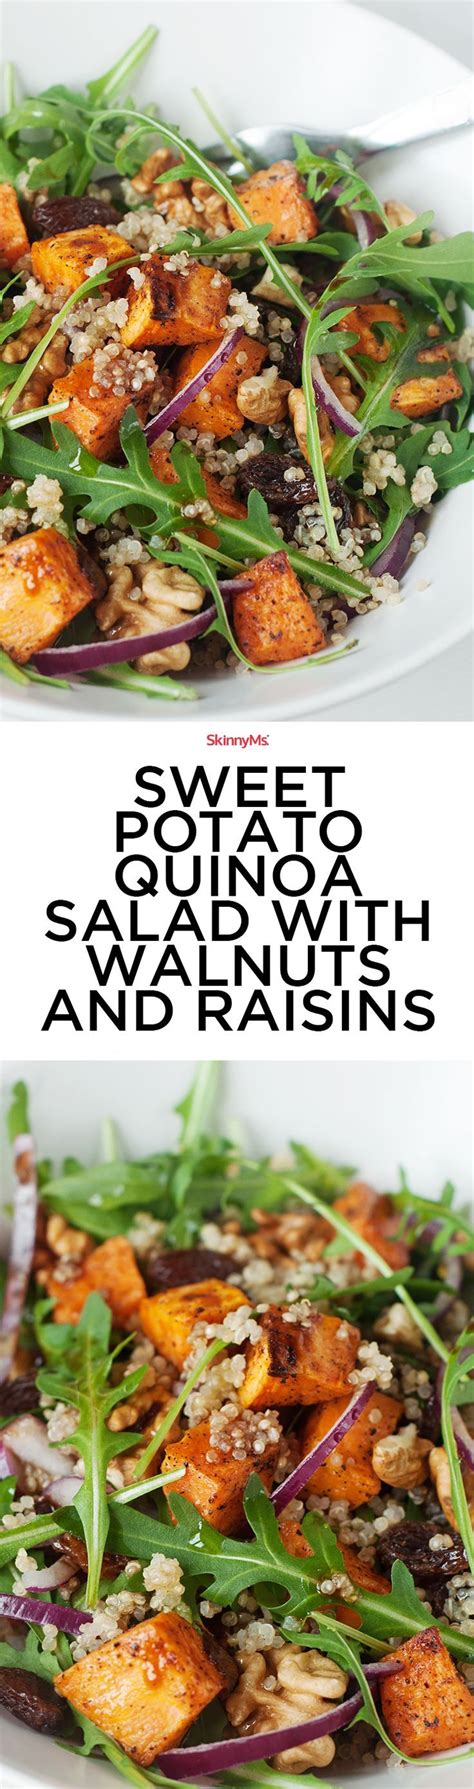 This is not a potato salad, the reviewer says. Sweet Potato Quinoa Salad with Walnuts and Raisins | Recipe | Vegetarian recipes, Healthy recipes